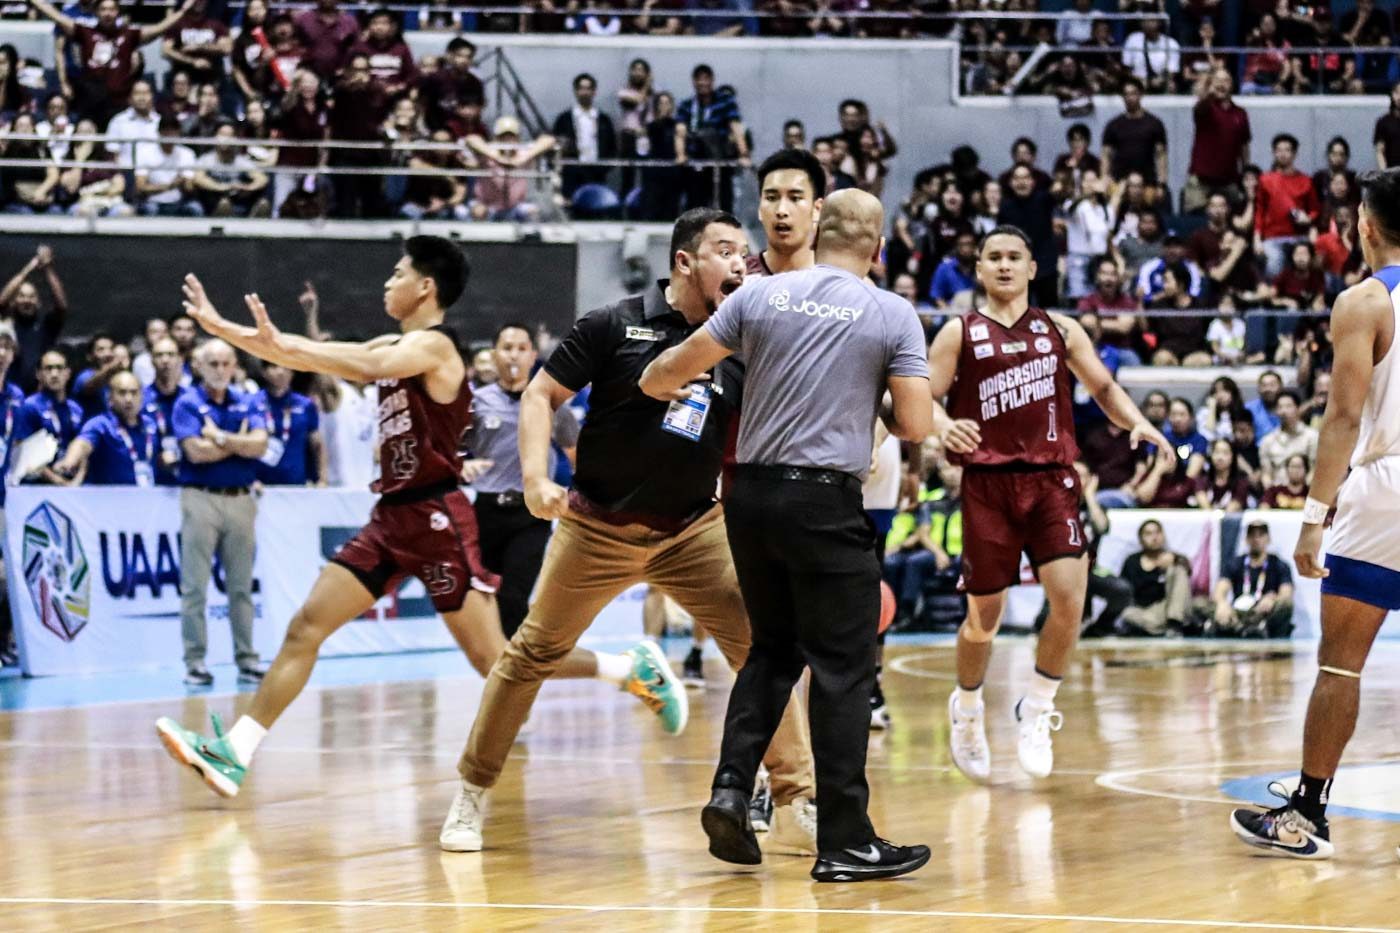 UP coach Bo Perasol suspended for 3 games